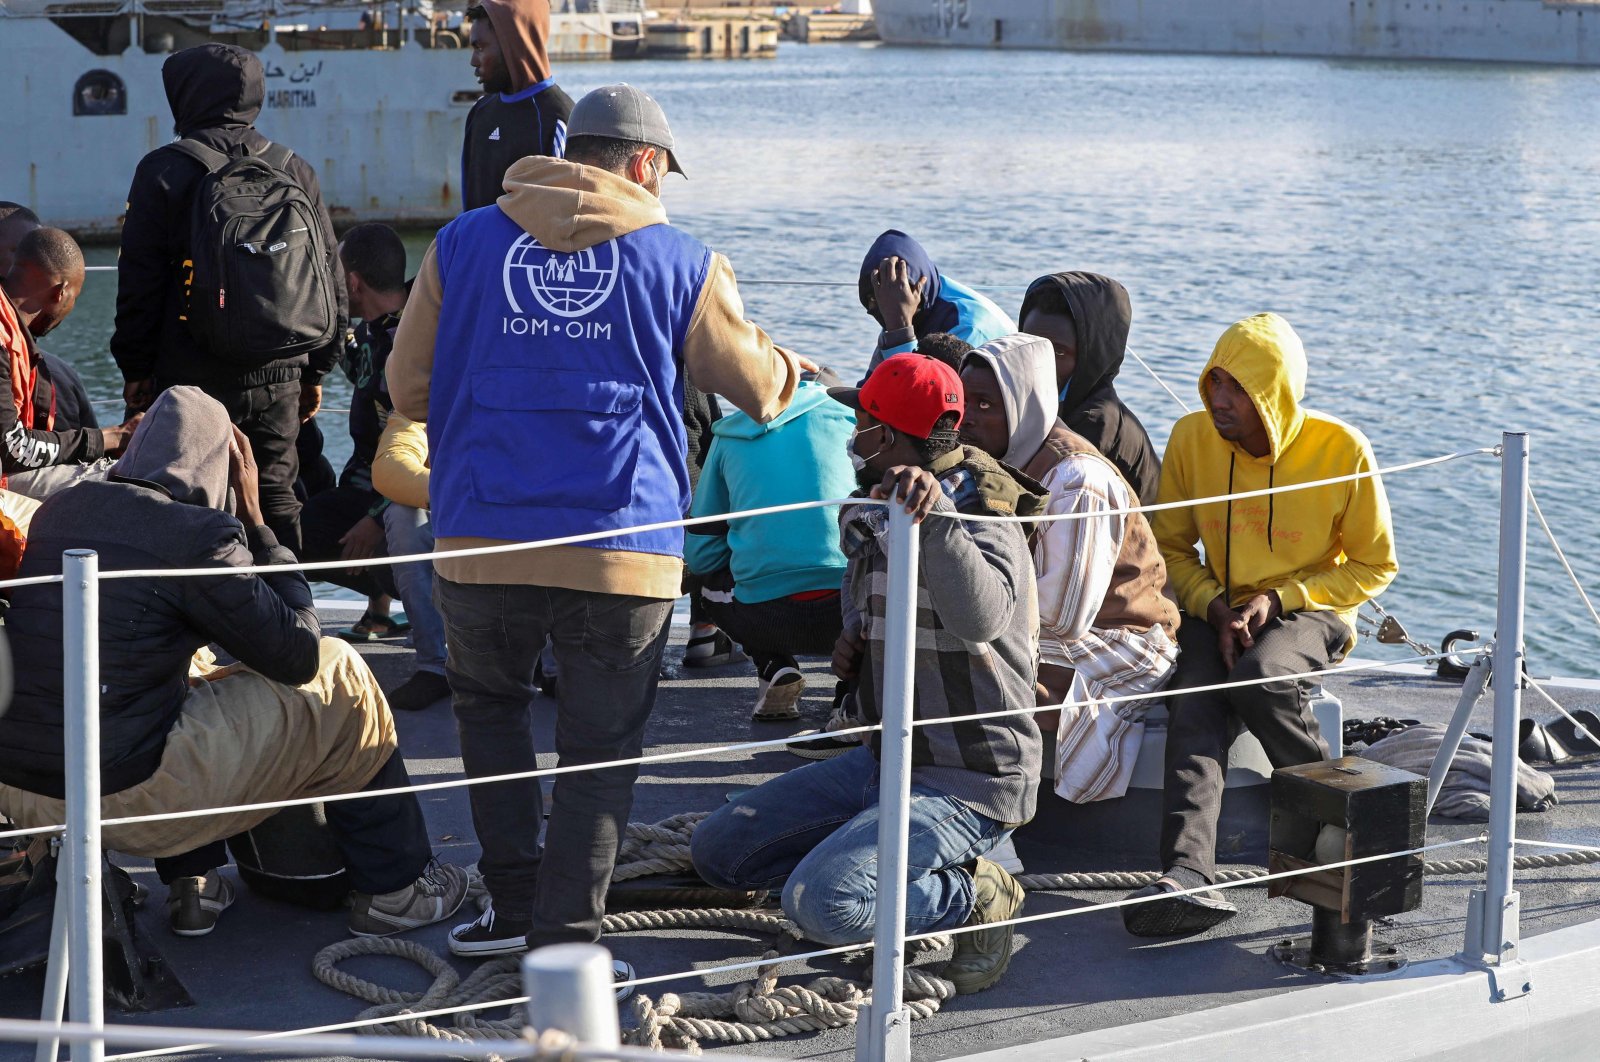 236 migrants off the coast of Libya were rescued by French NGOs